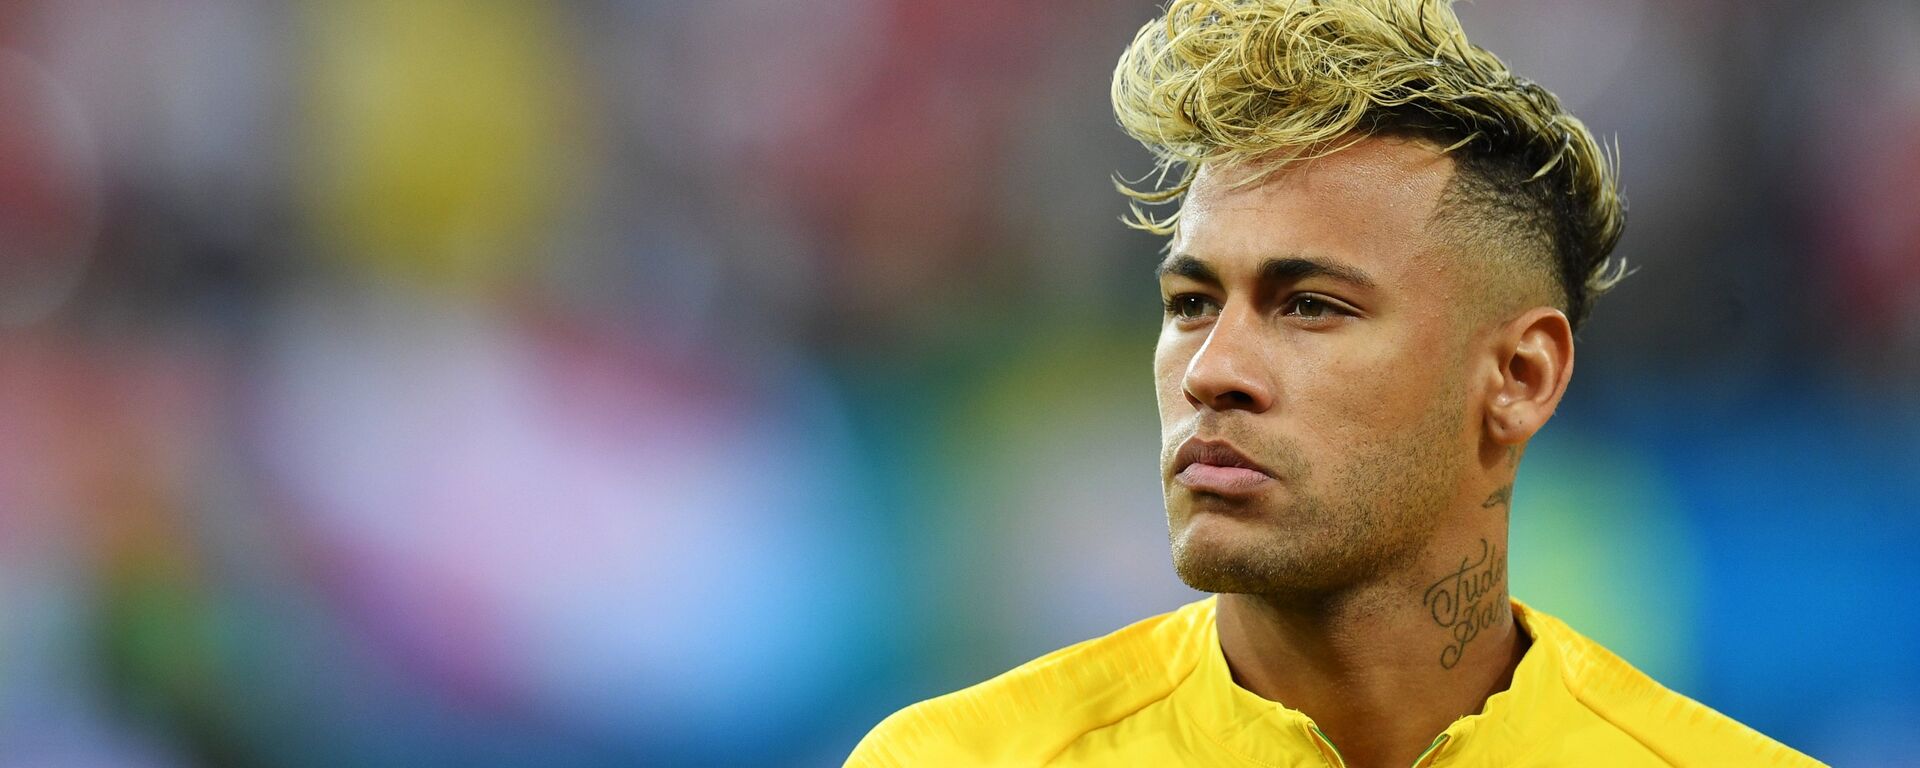 Brazil's Neymar listens to the national anthem before the World Cup Group E soccer match between Brazil and Switzerland in Rostov-on-Don, Russia, June 17, 2018 - Sputnik International, 1920, 13.01.2022